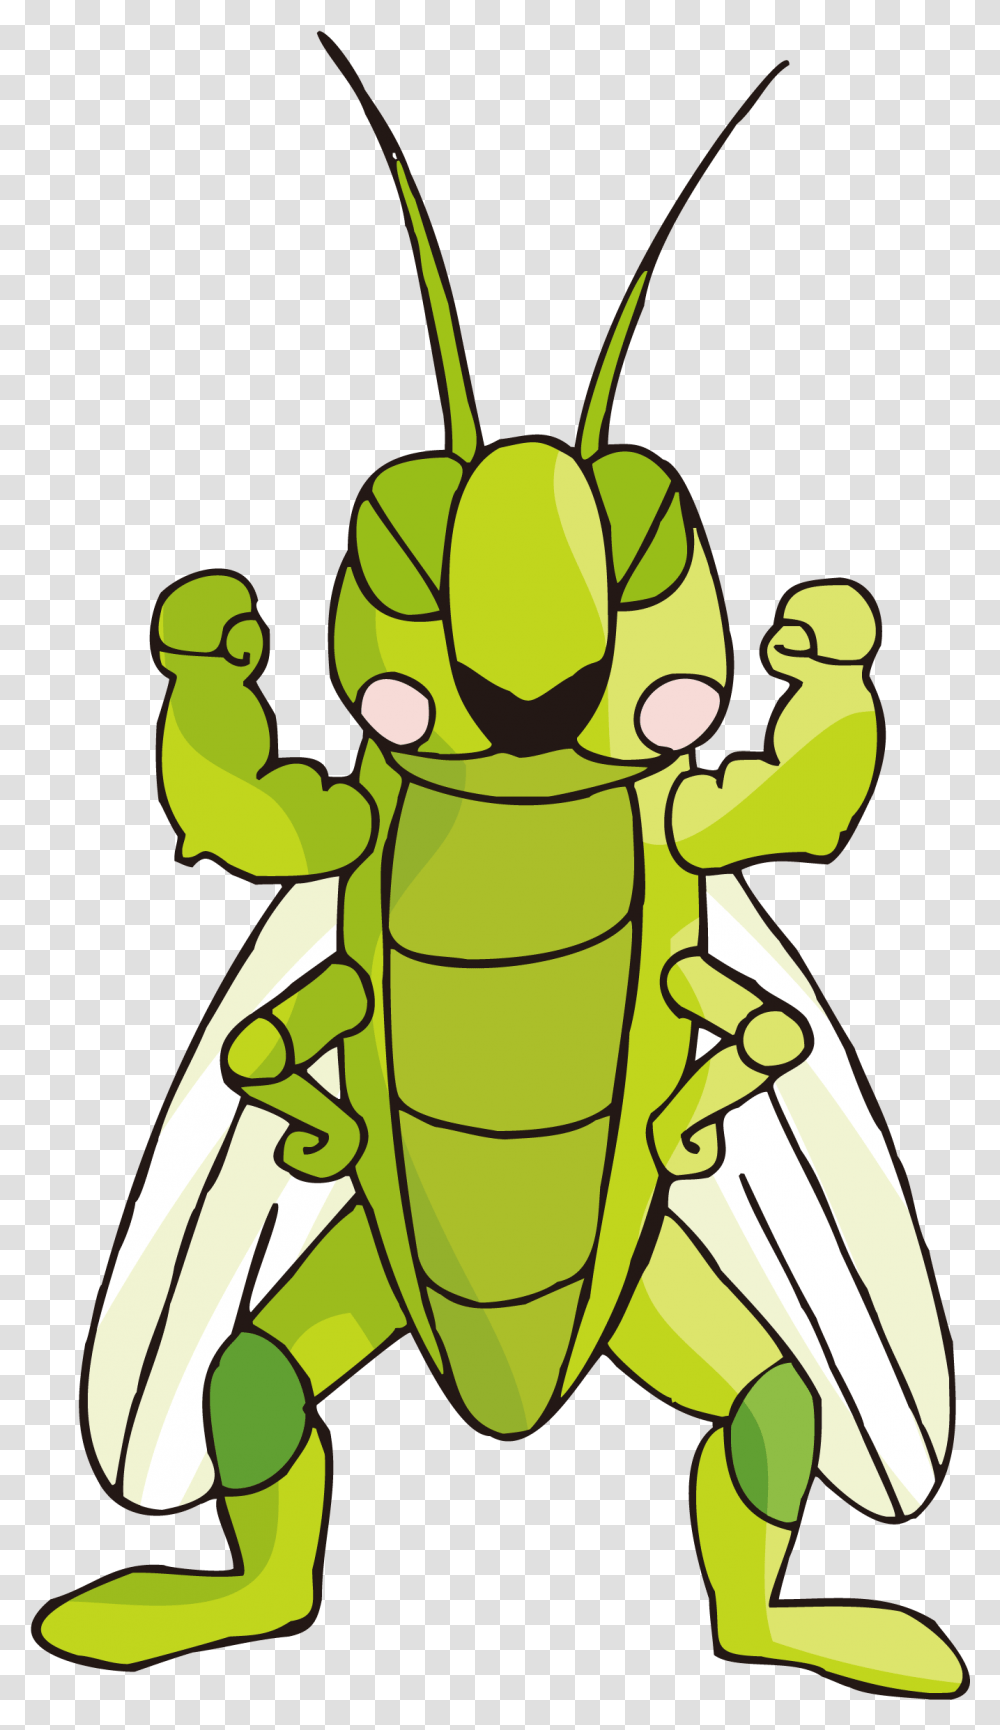 Cartoon Images Gallery For Insect Cartoon Cricket, Animal, Lizard, Reptile, Invertebrate Transparent Png